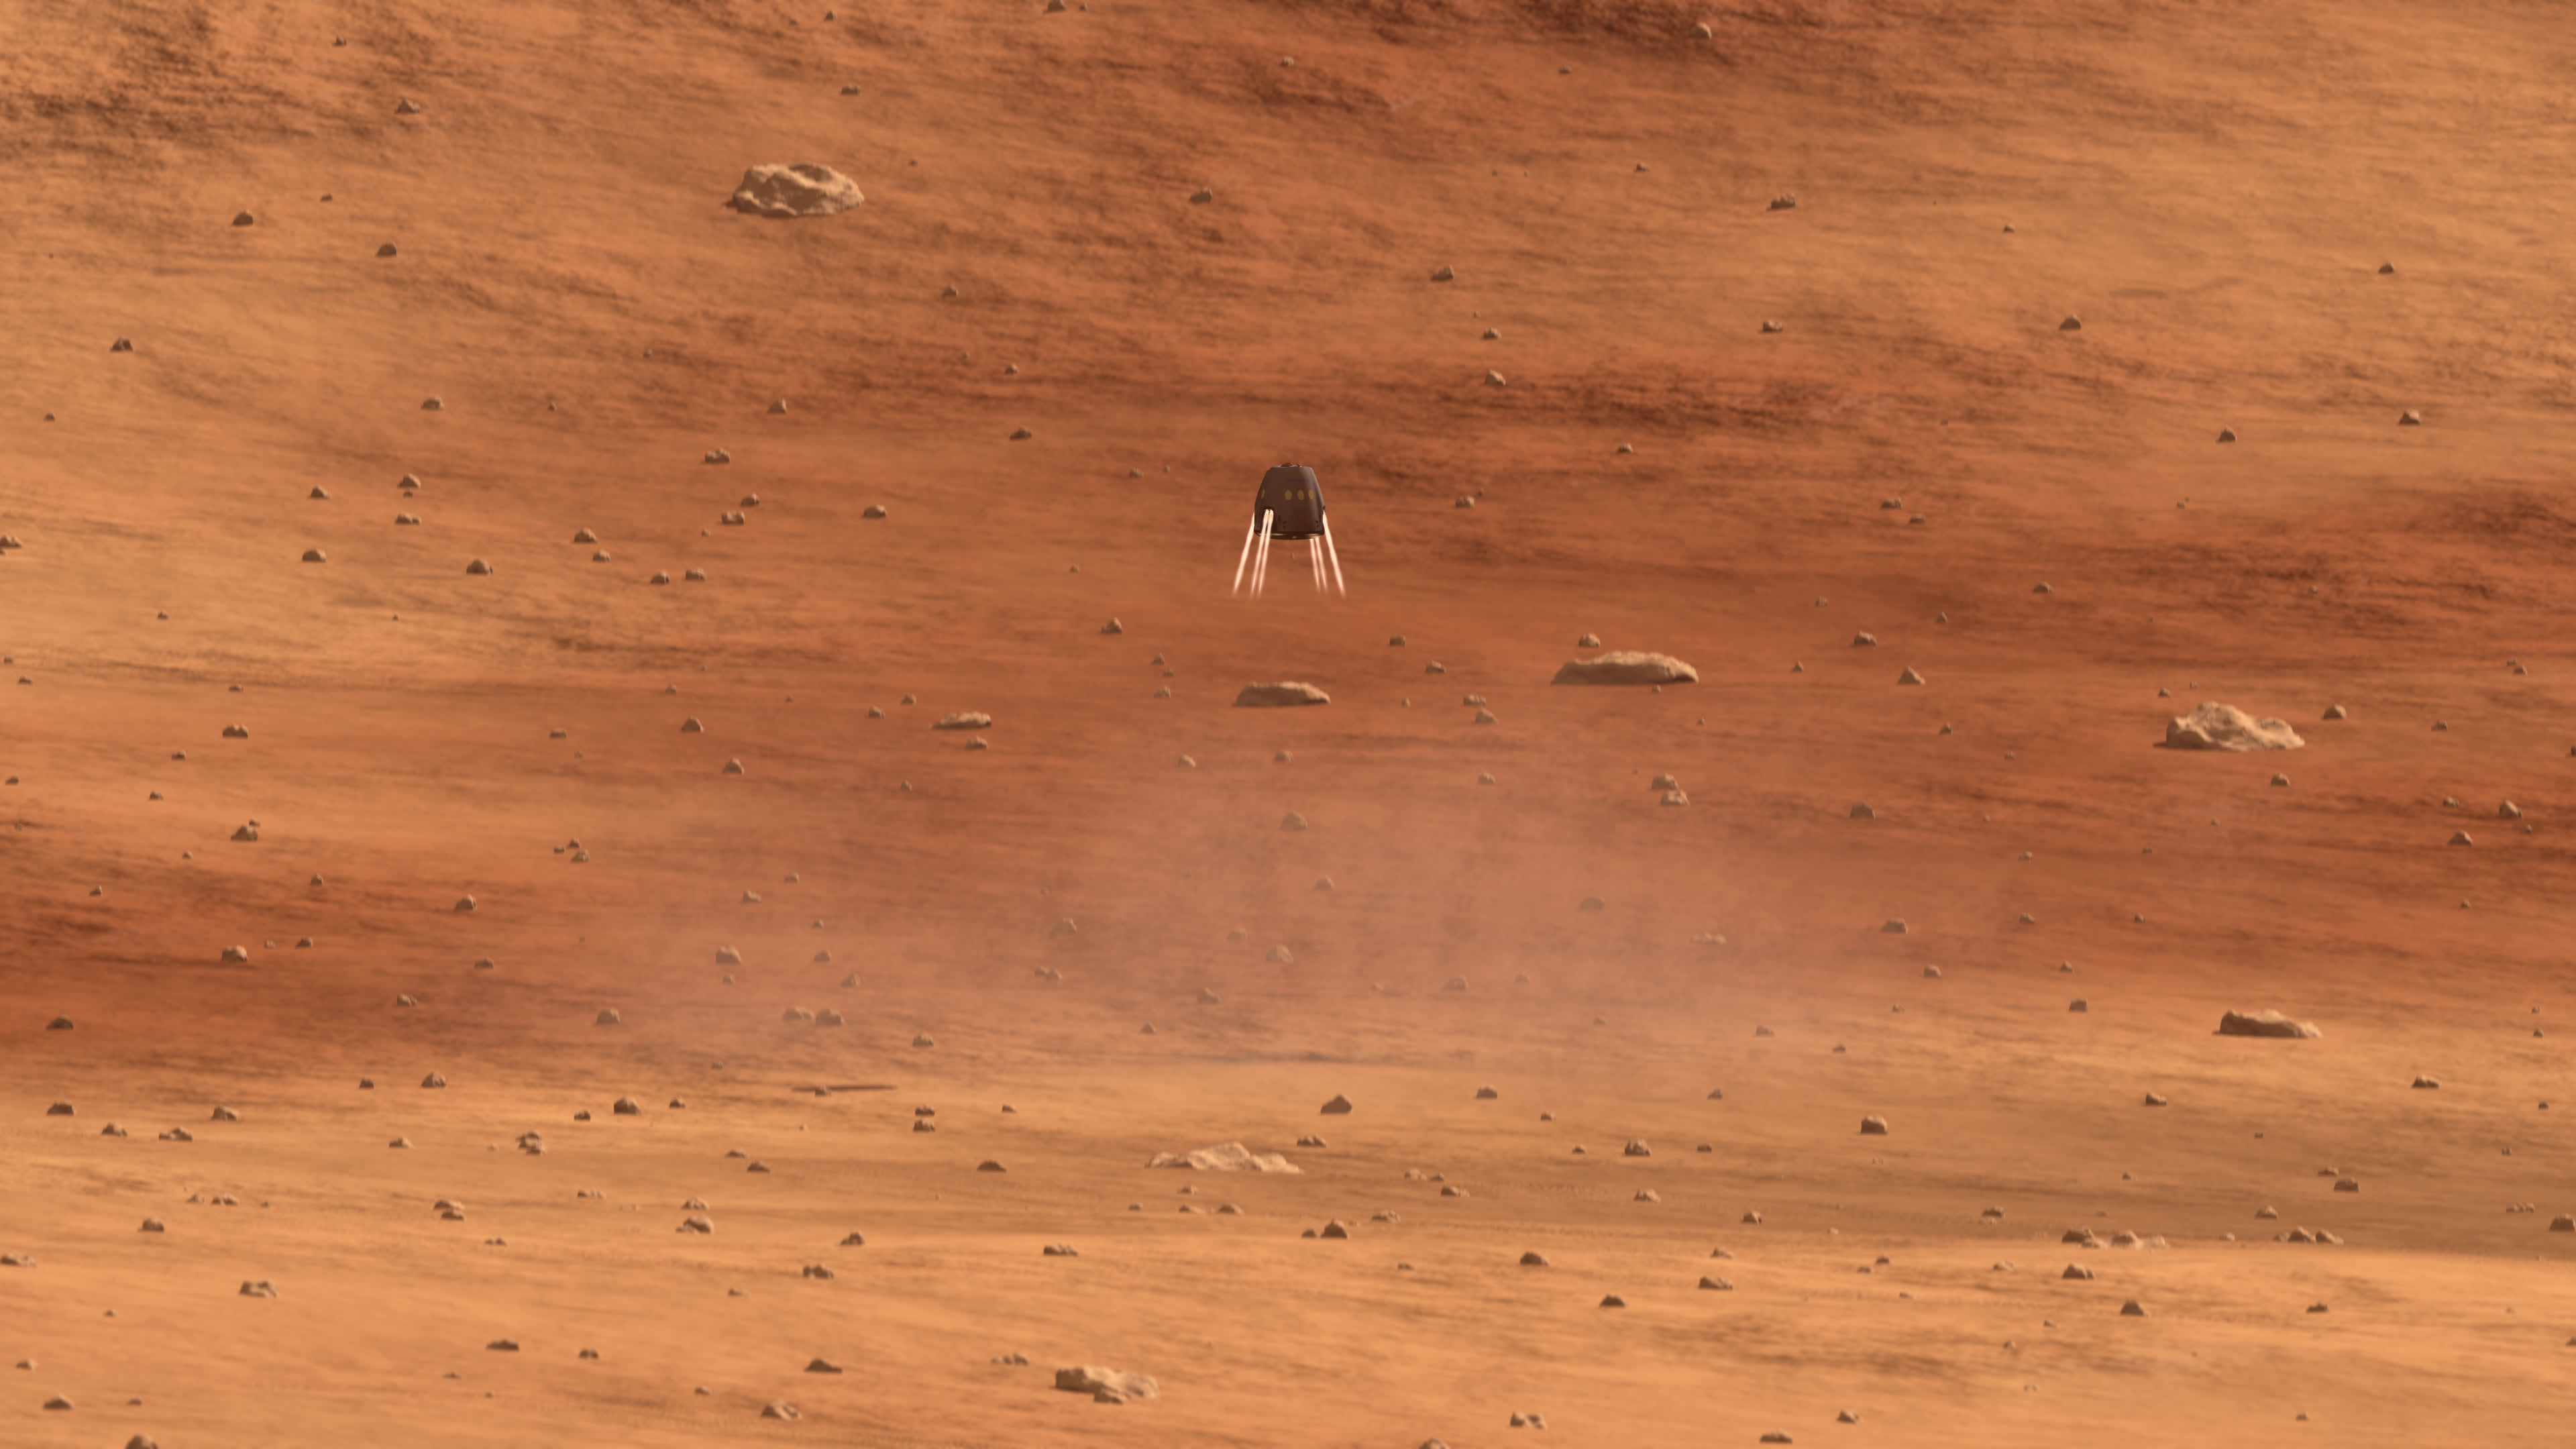 The Red Dragon capsule lands on Mars.